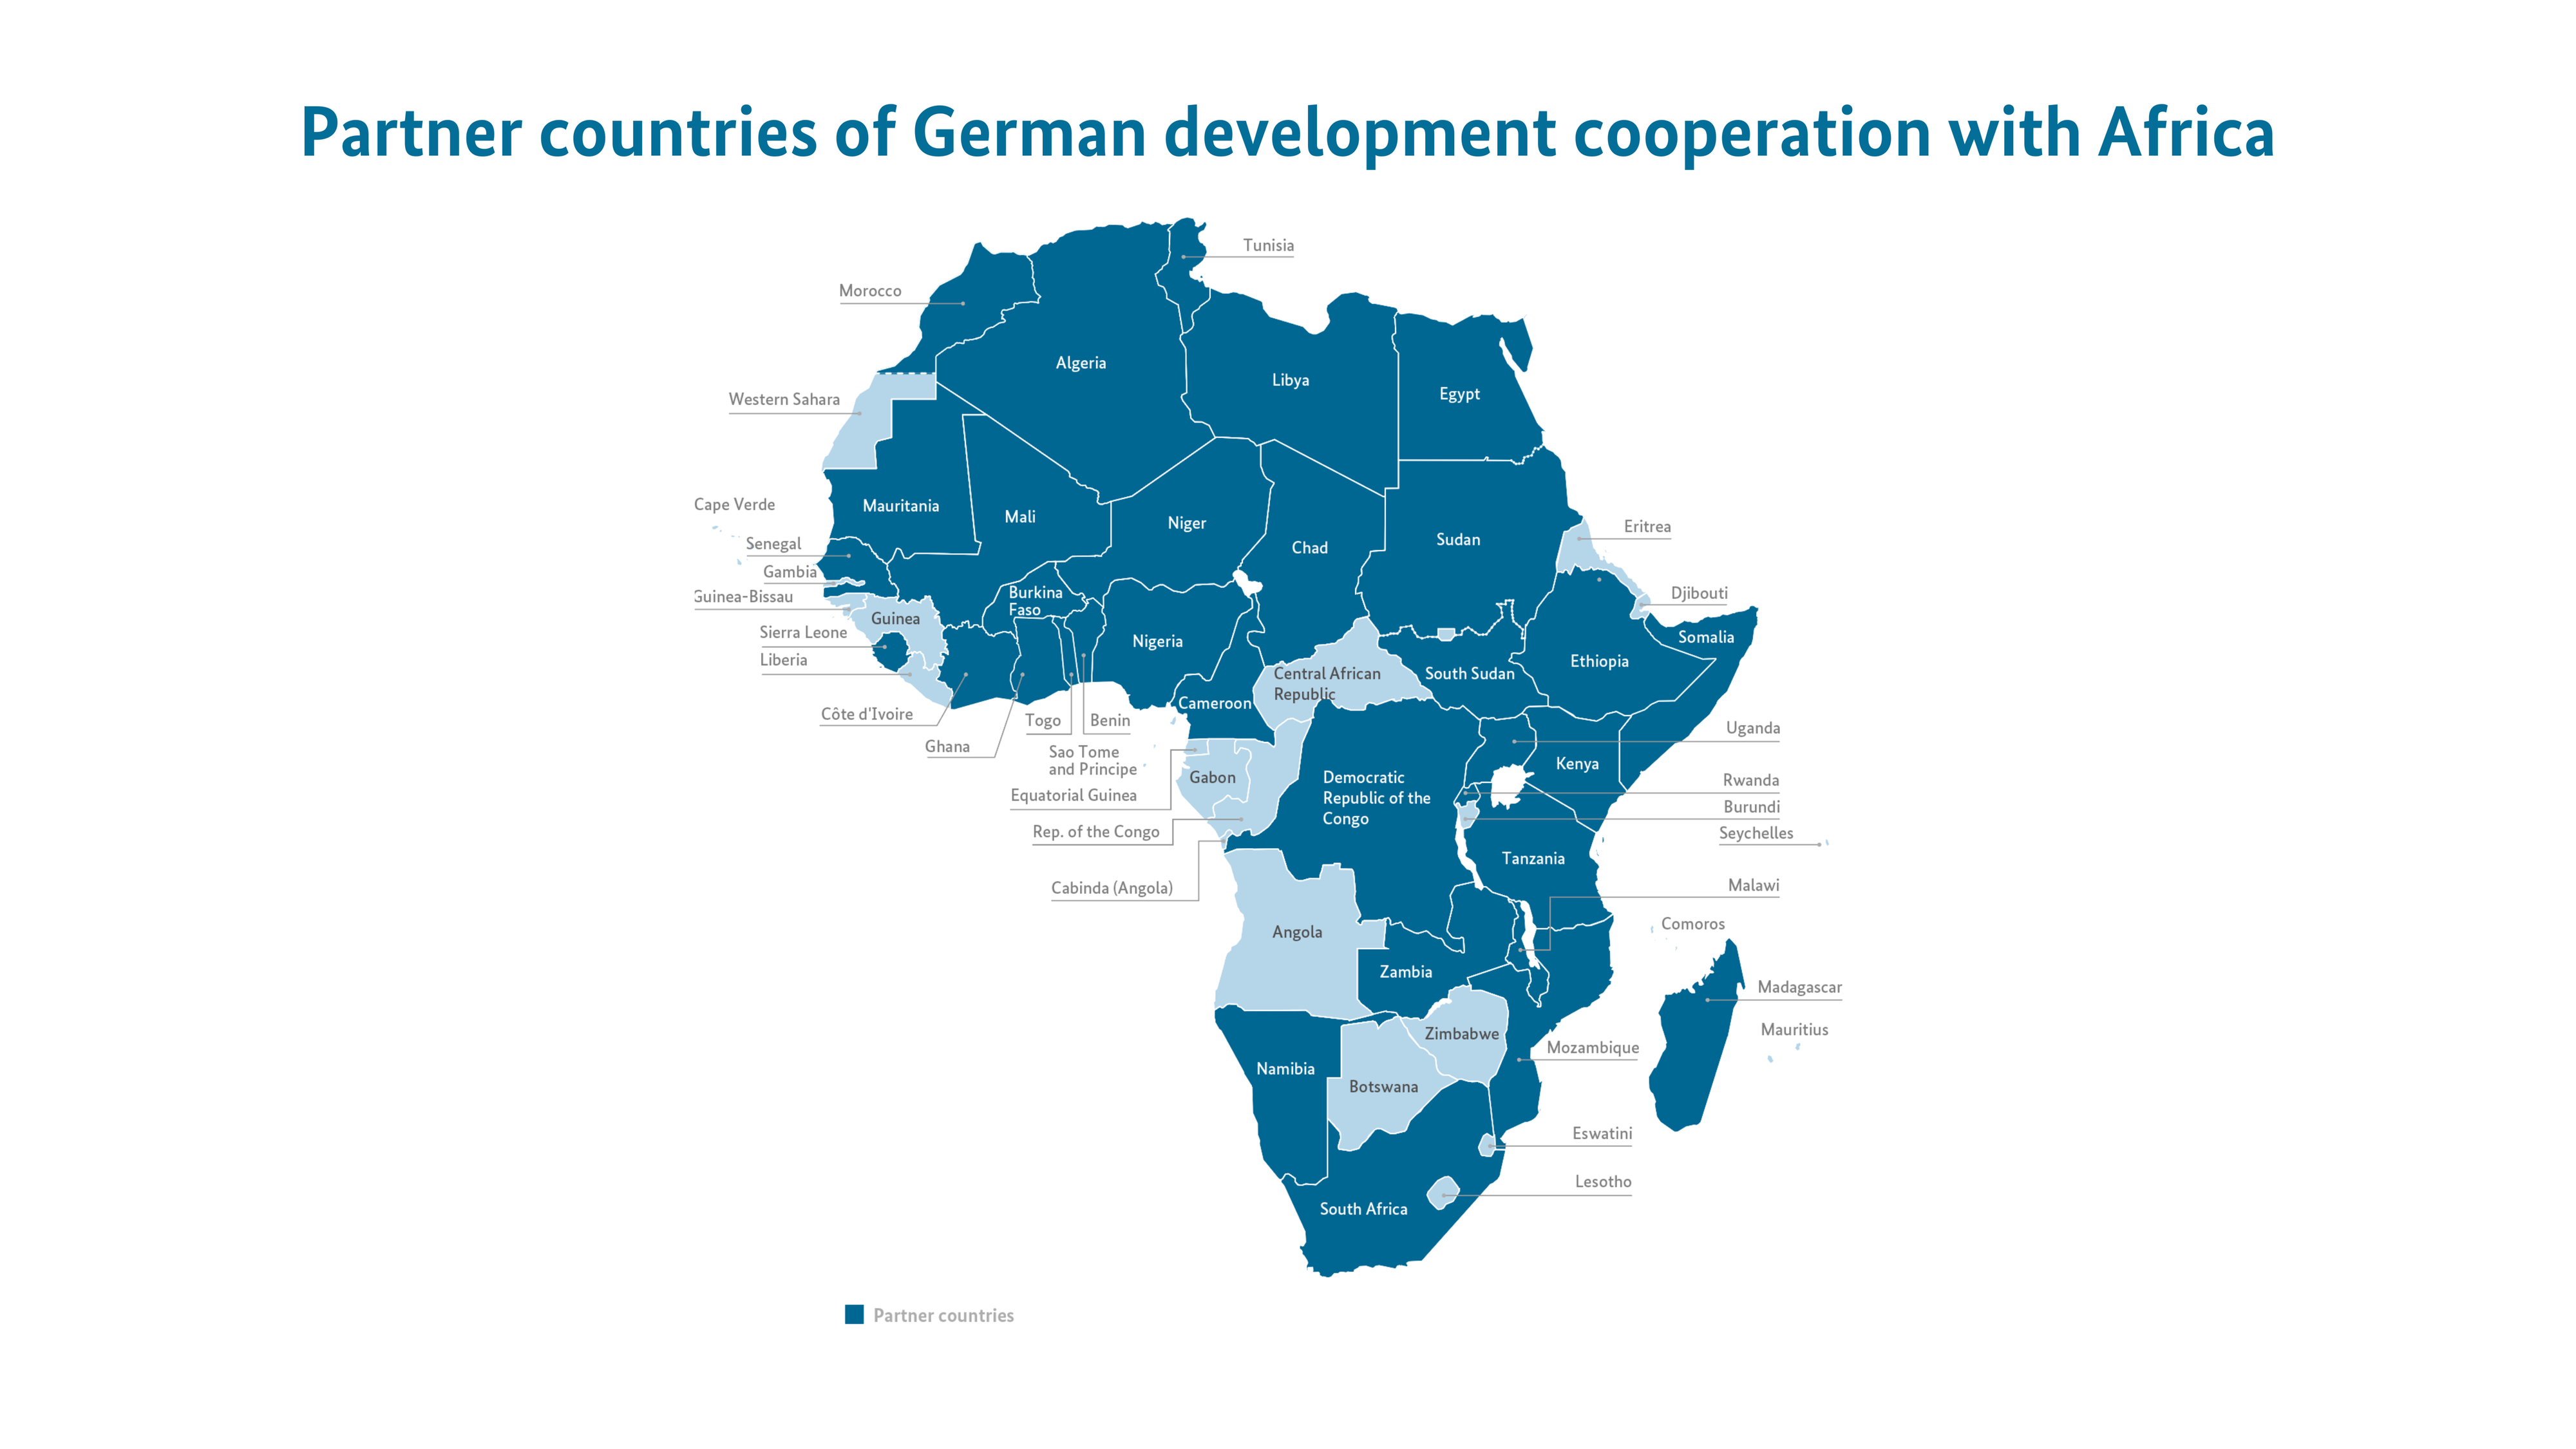 Partner countries of German development cooperation with Africa